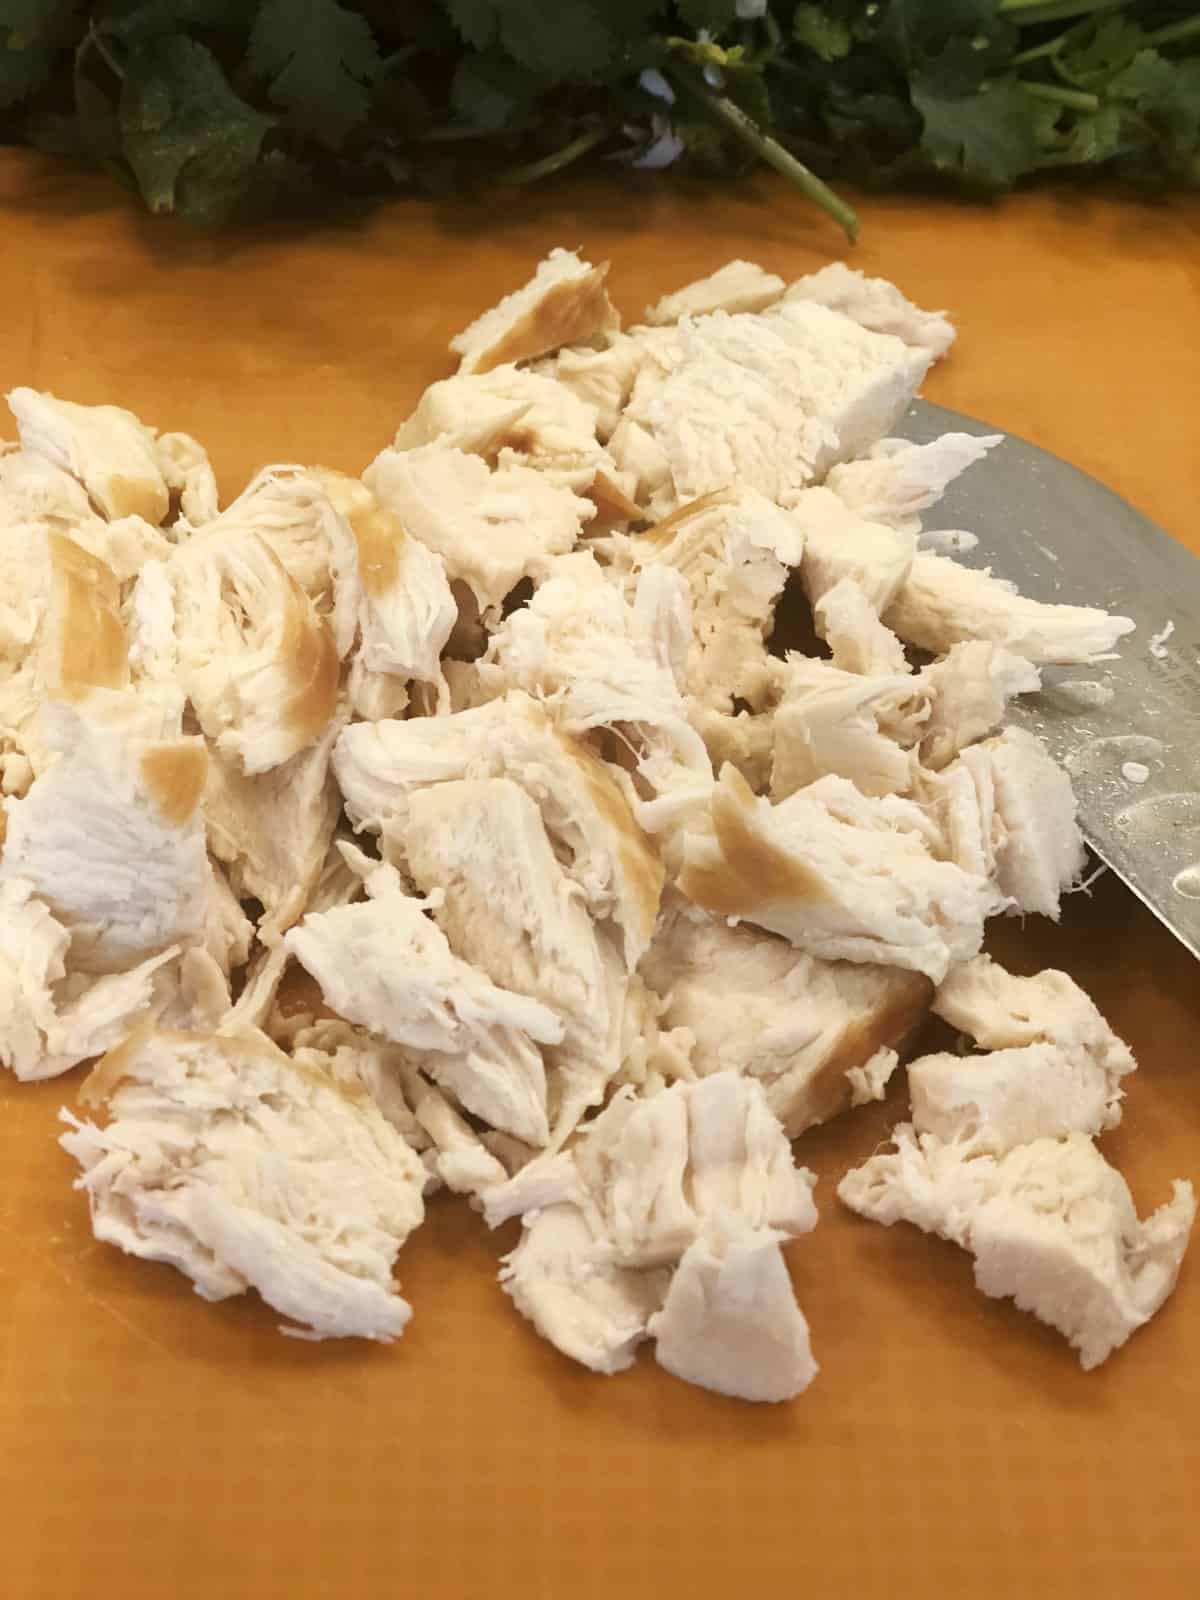 Chopped cooked chicken breast on orange cutting mat with knife.